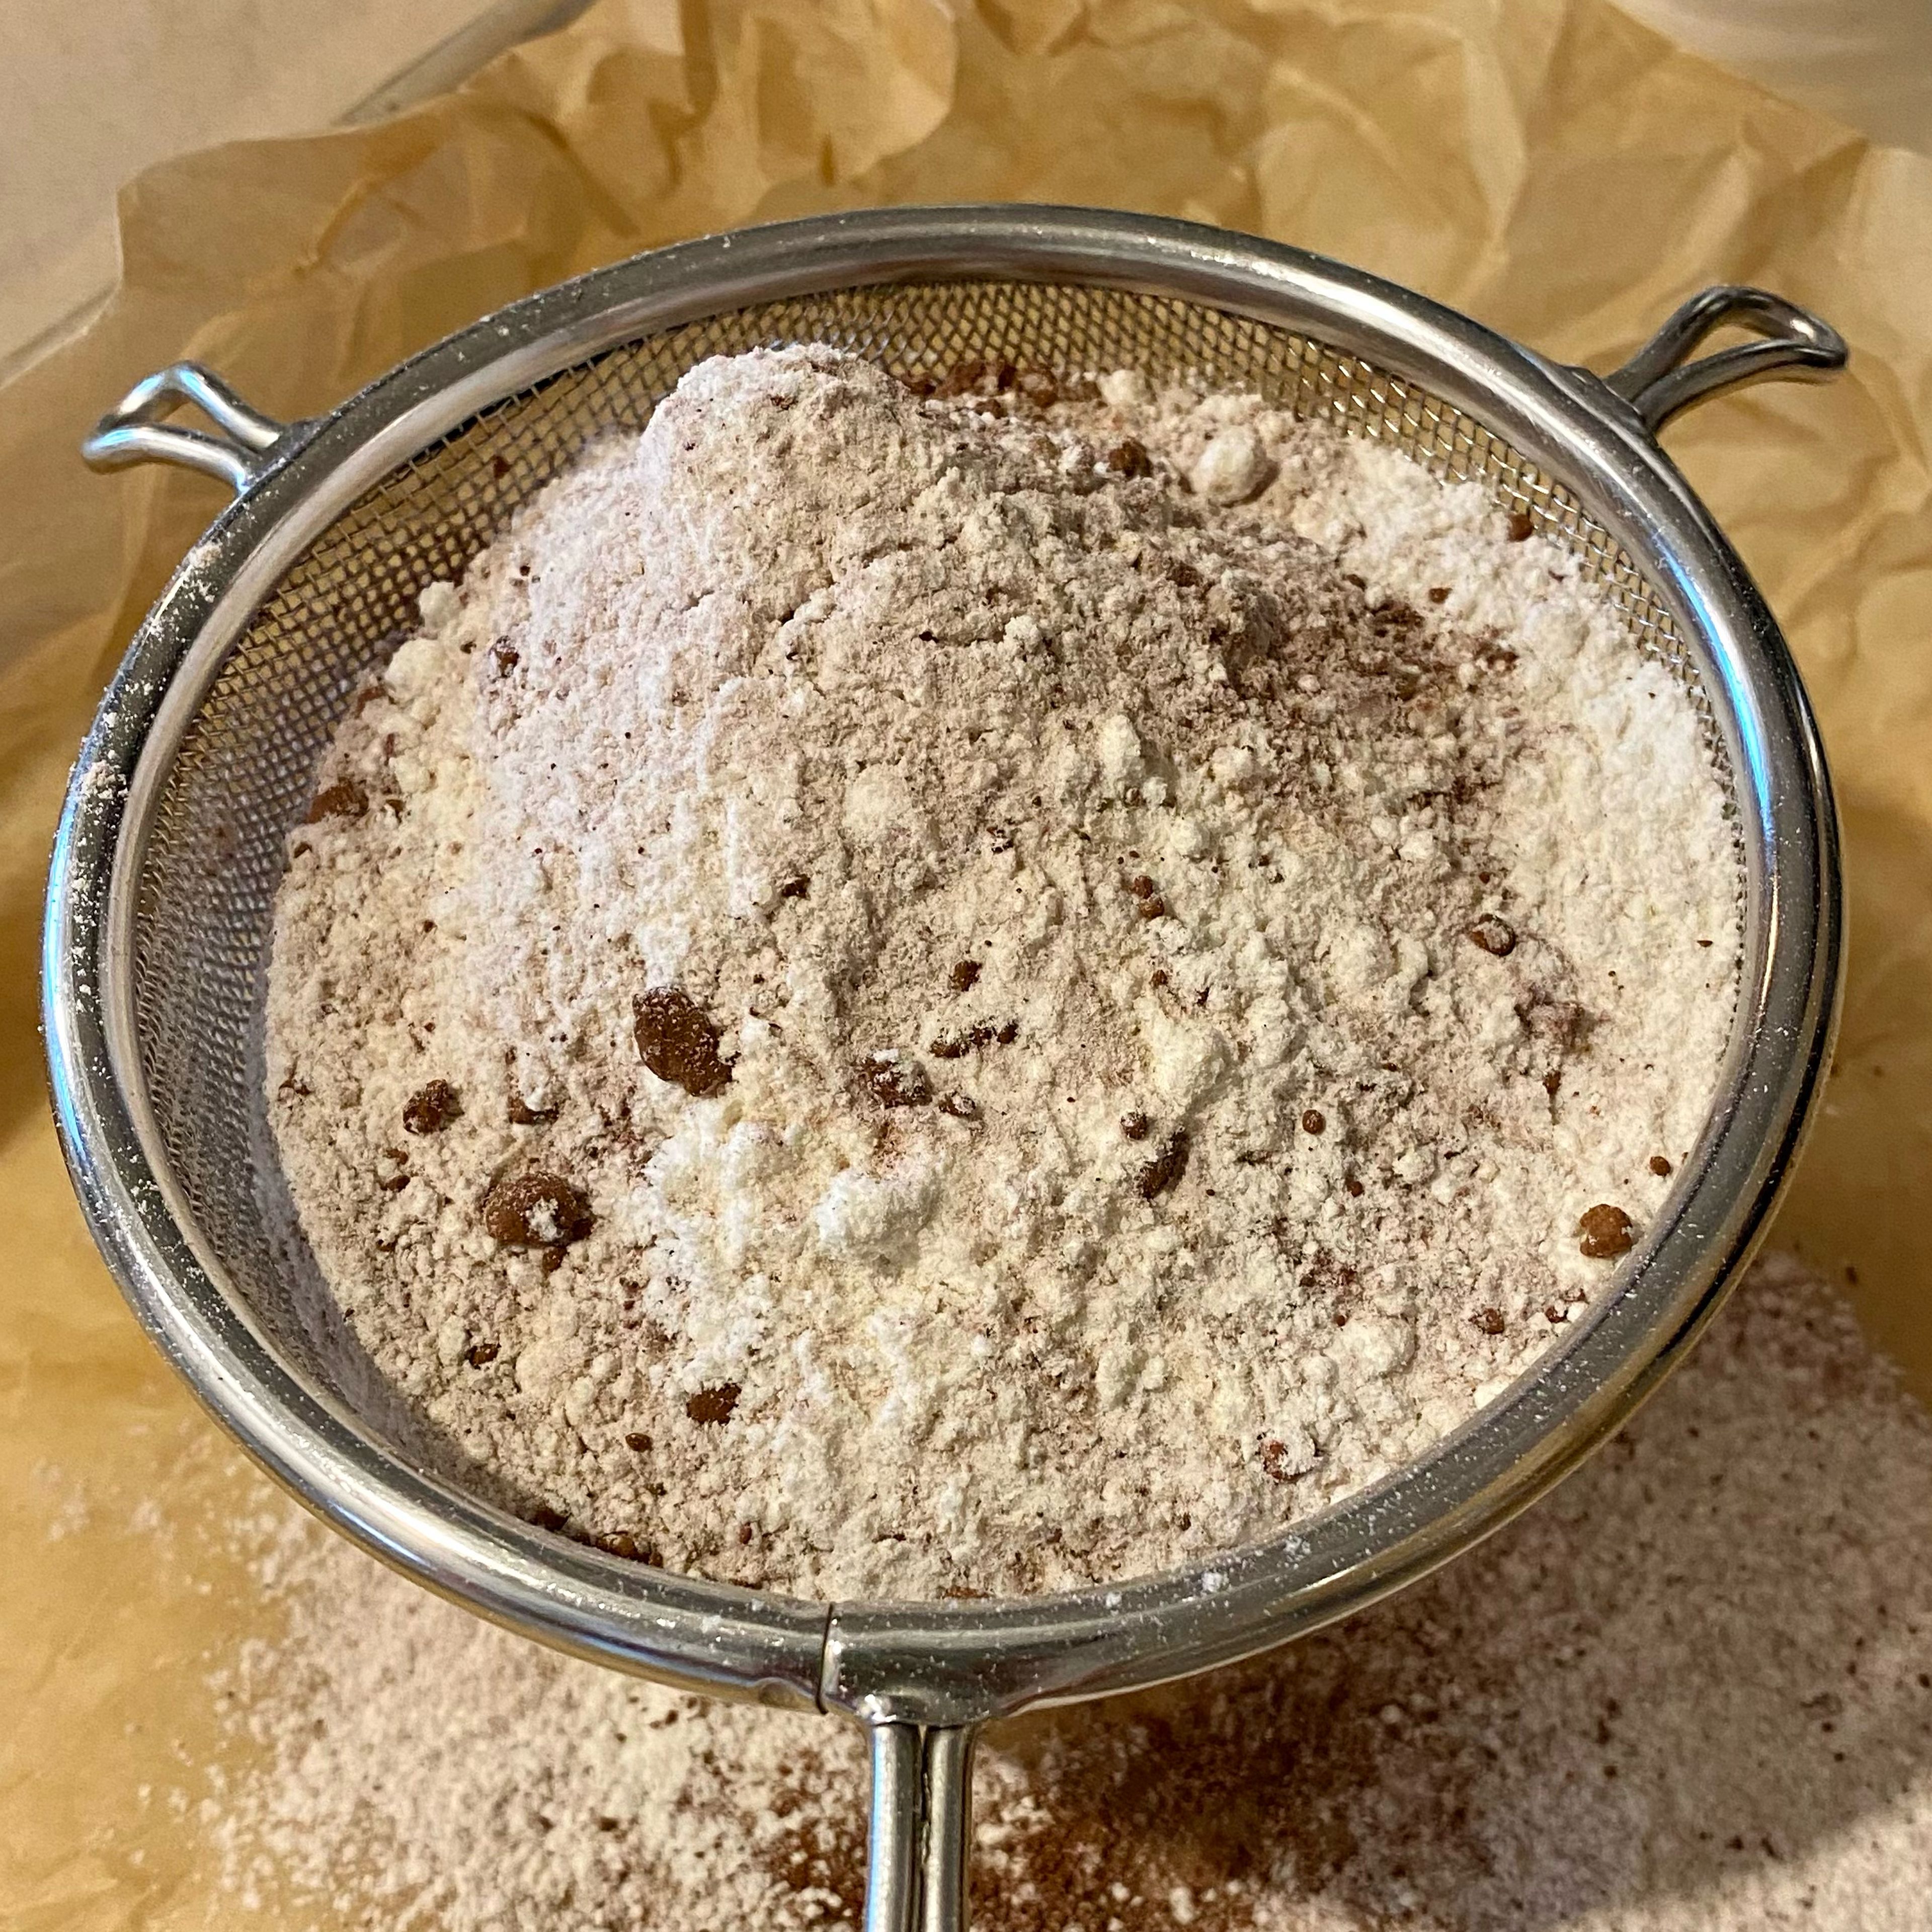 Combine the (150g) Cake flour, (7g) All-purpose flour, (10g) Dutch-processed cocoa powder, (1 teaspoon) baking powder, and (½ teaspoon) salt and sift them through a mesh strainer, at least 2 times. Set aside. 